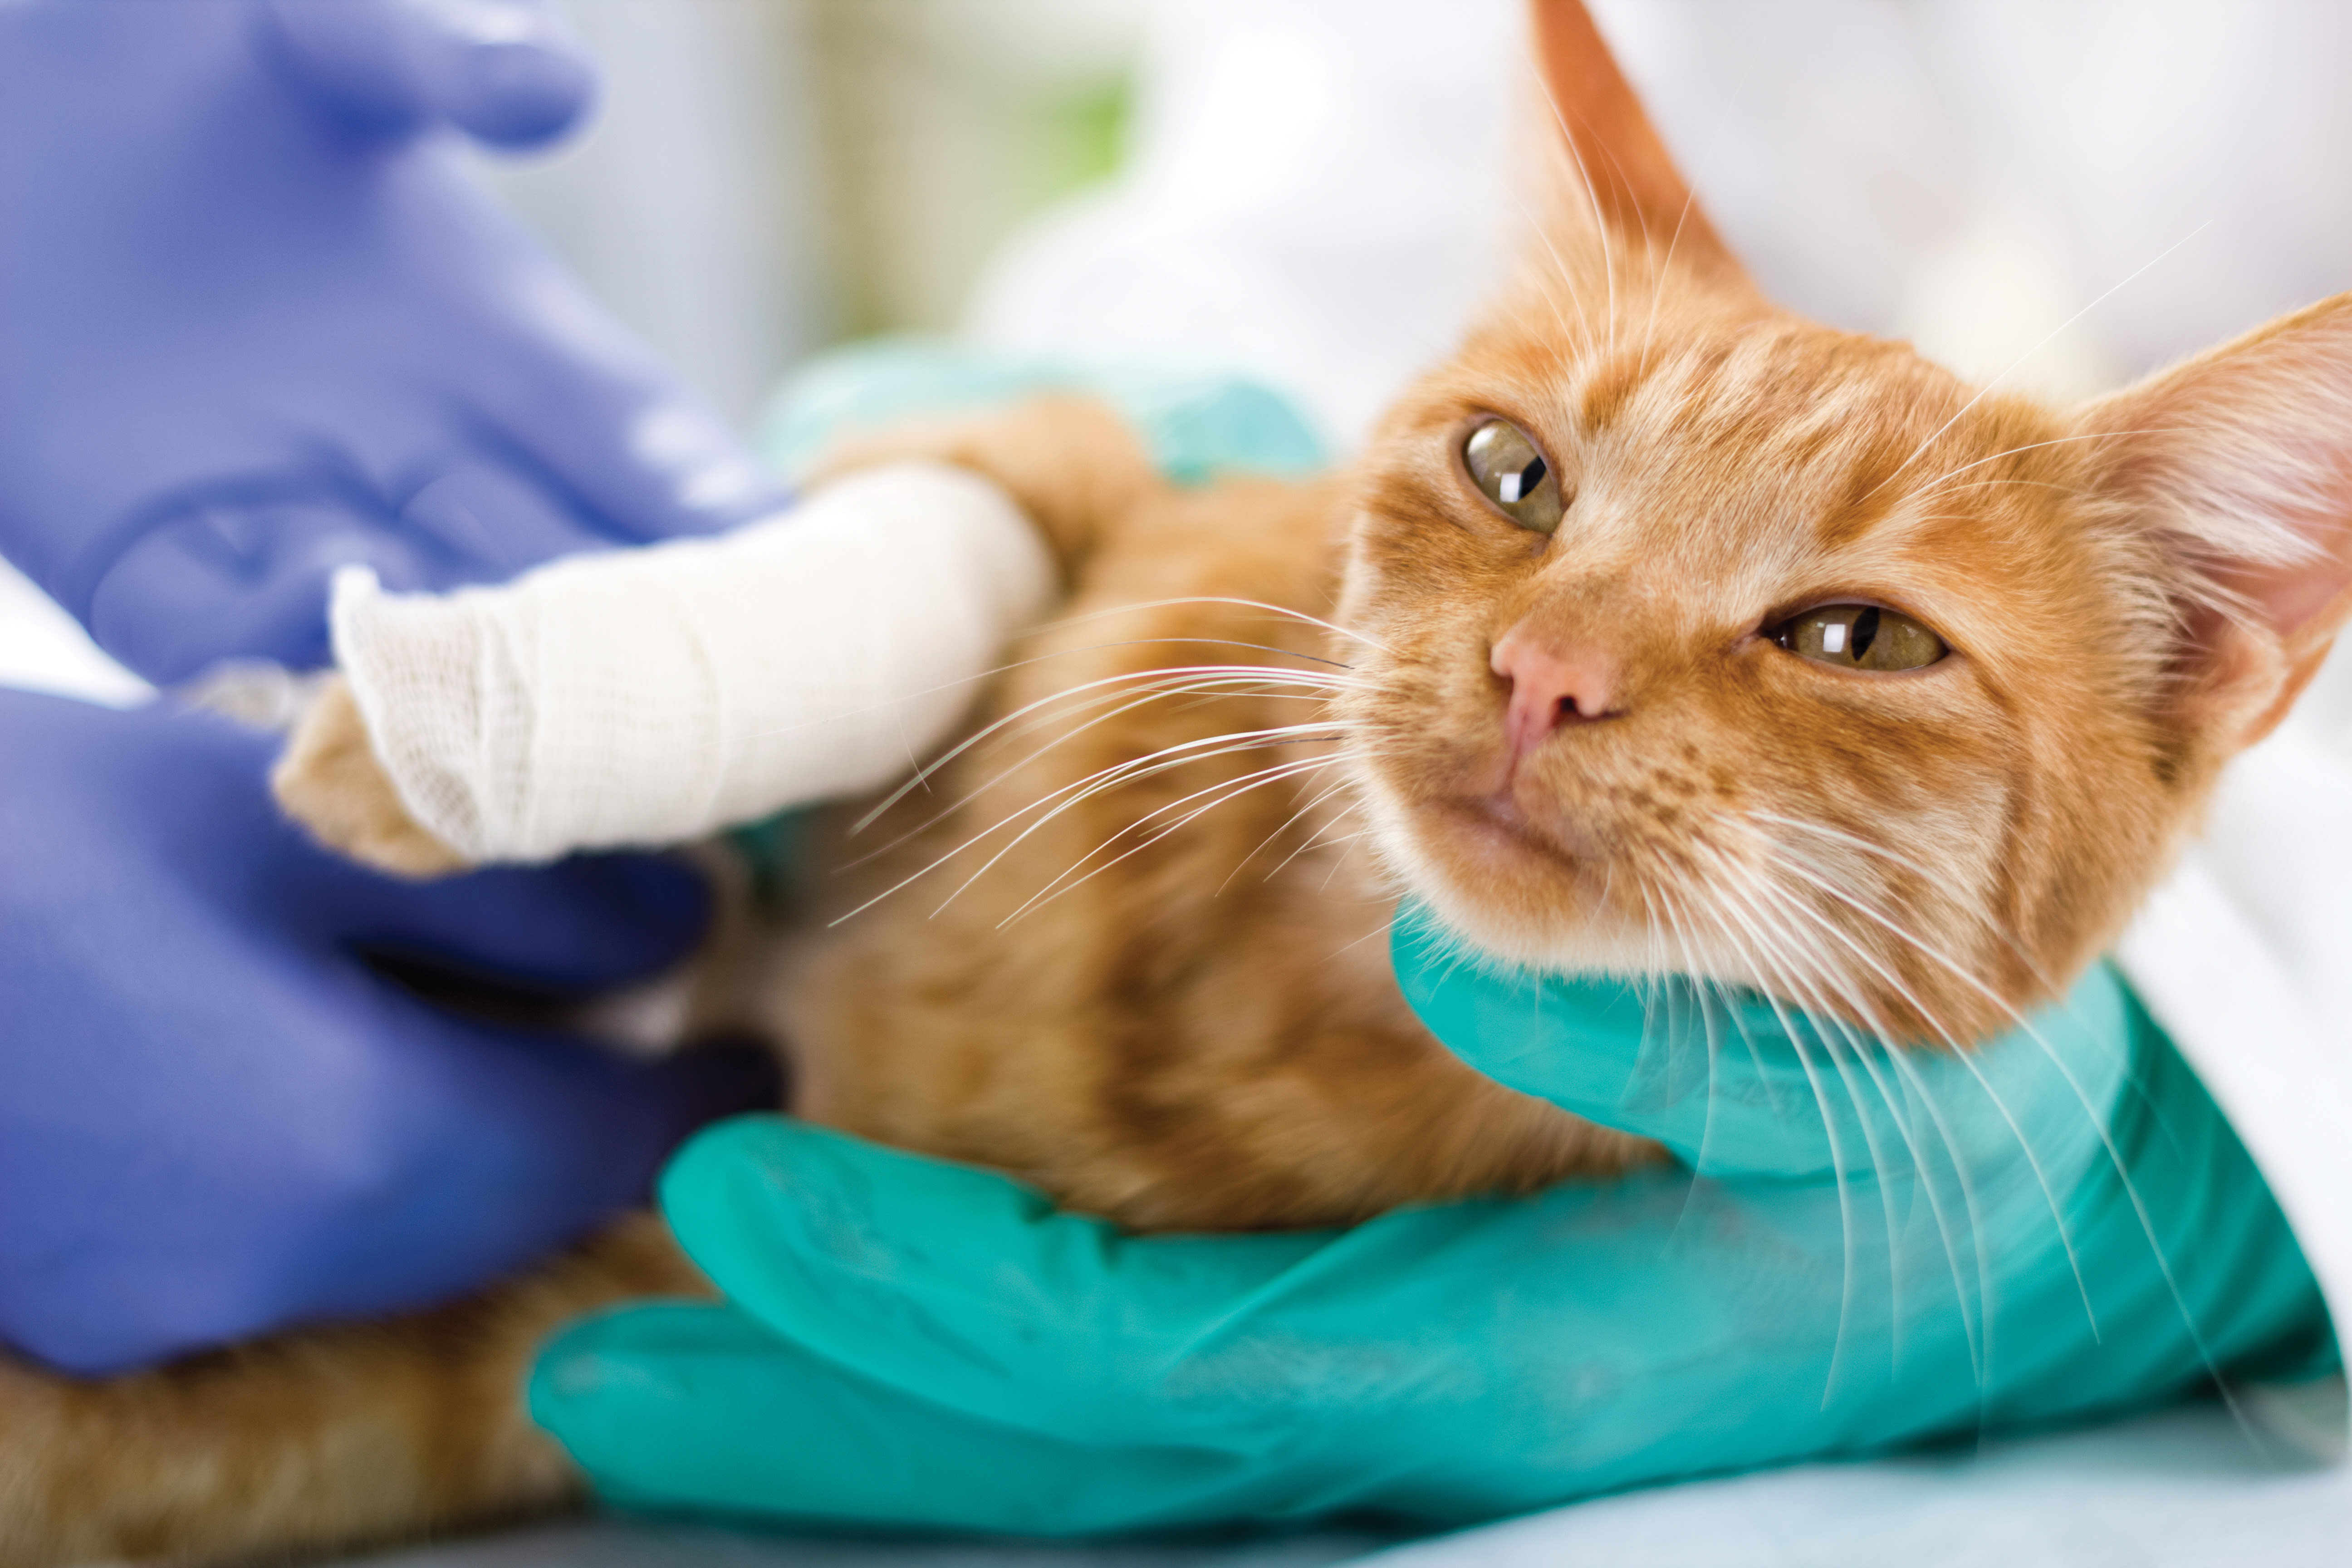 Orange cat with a bandaged paw being held by gloved hands